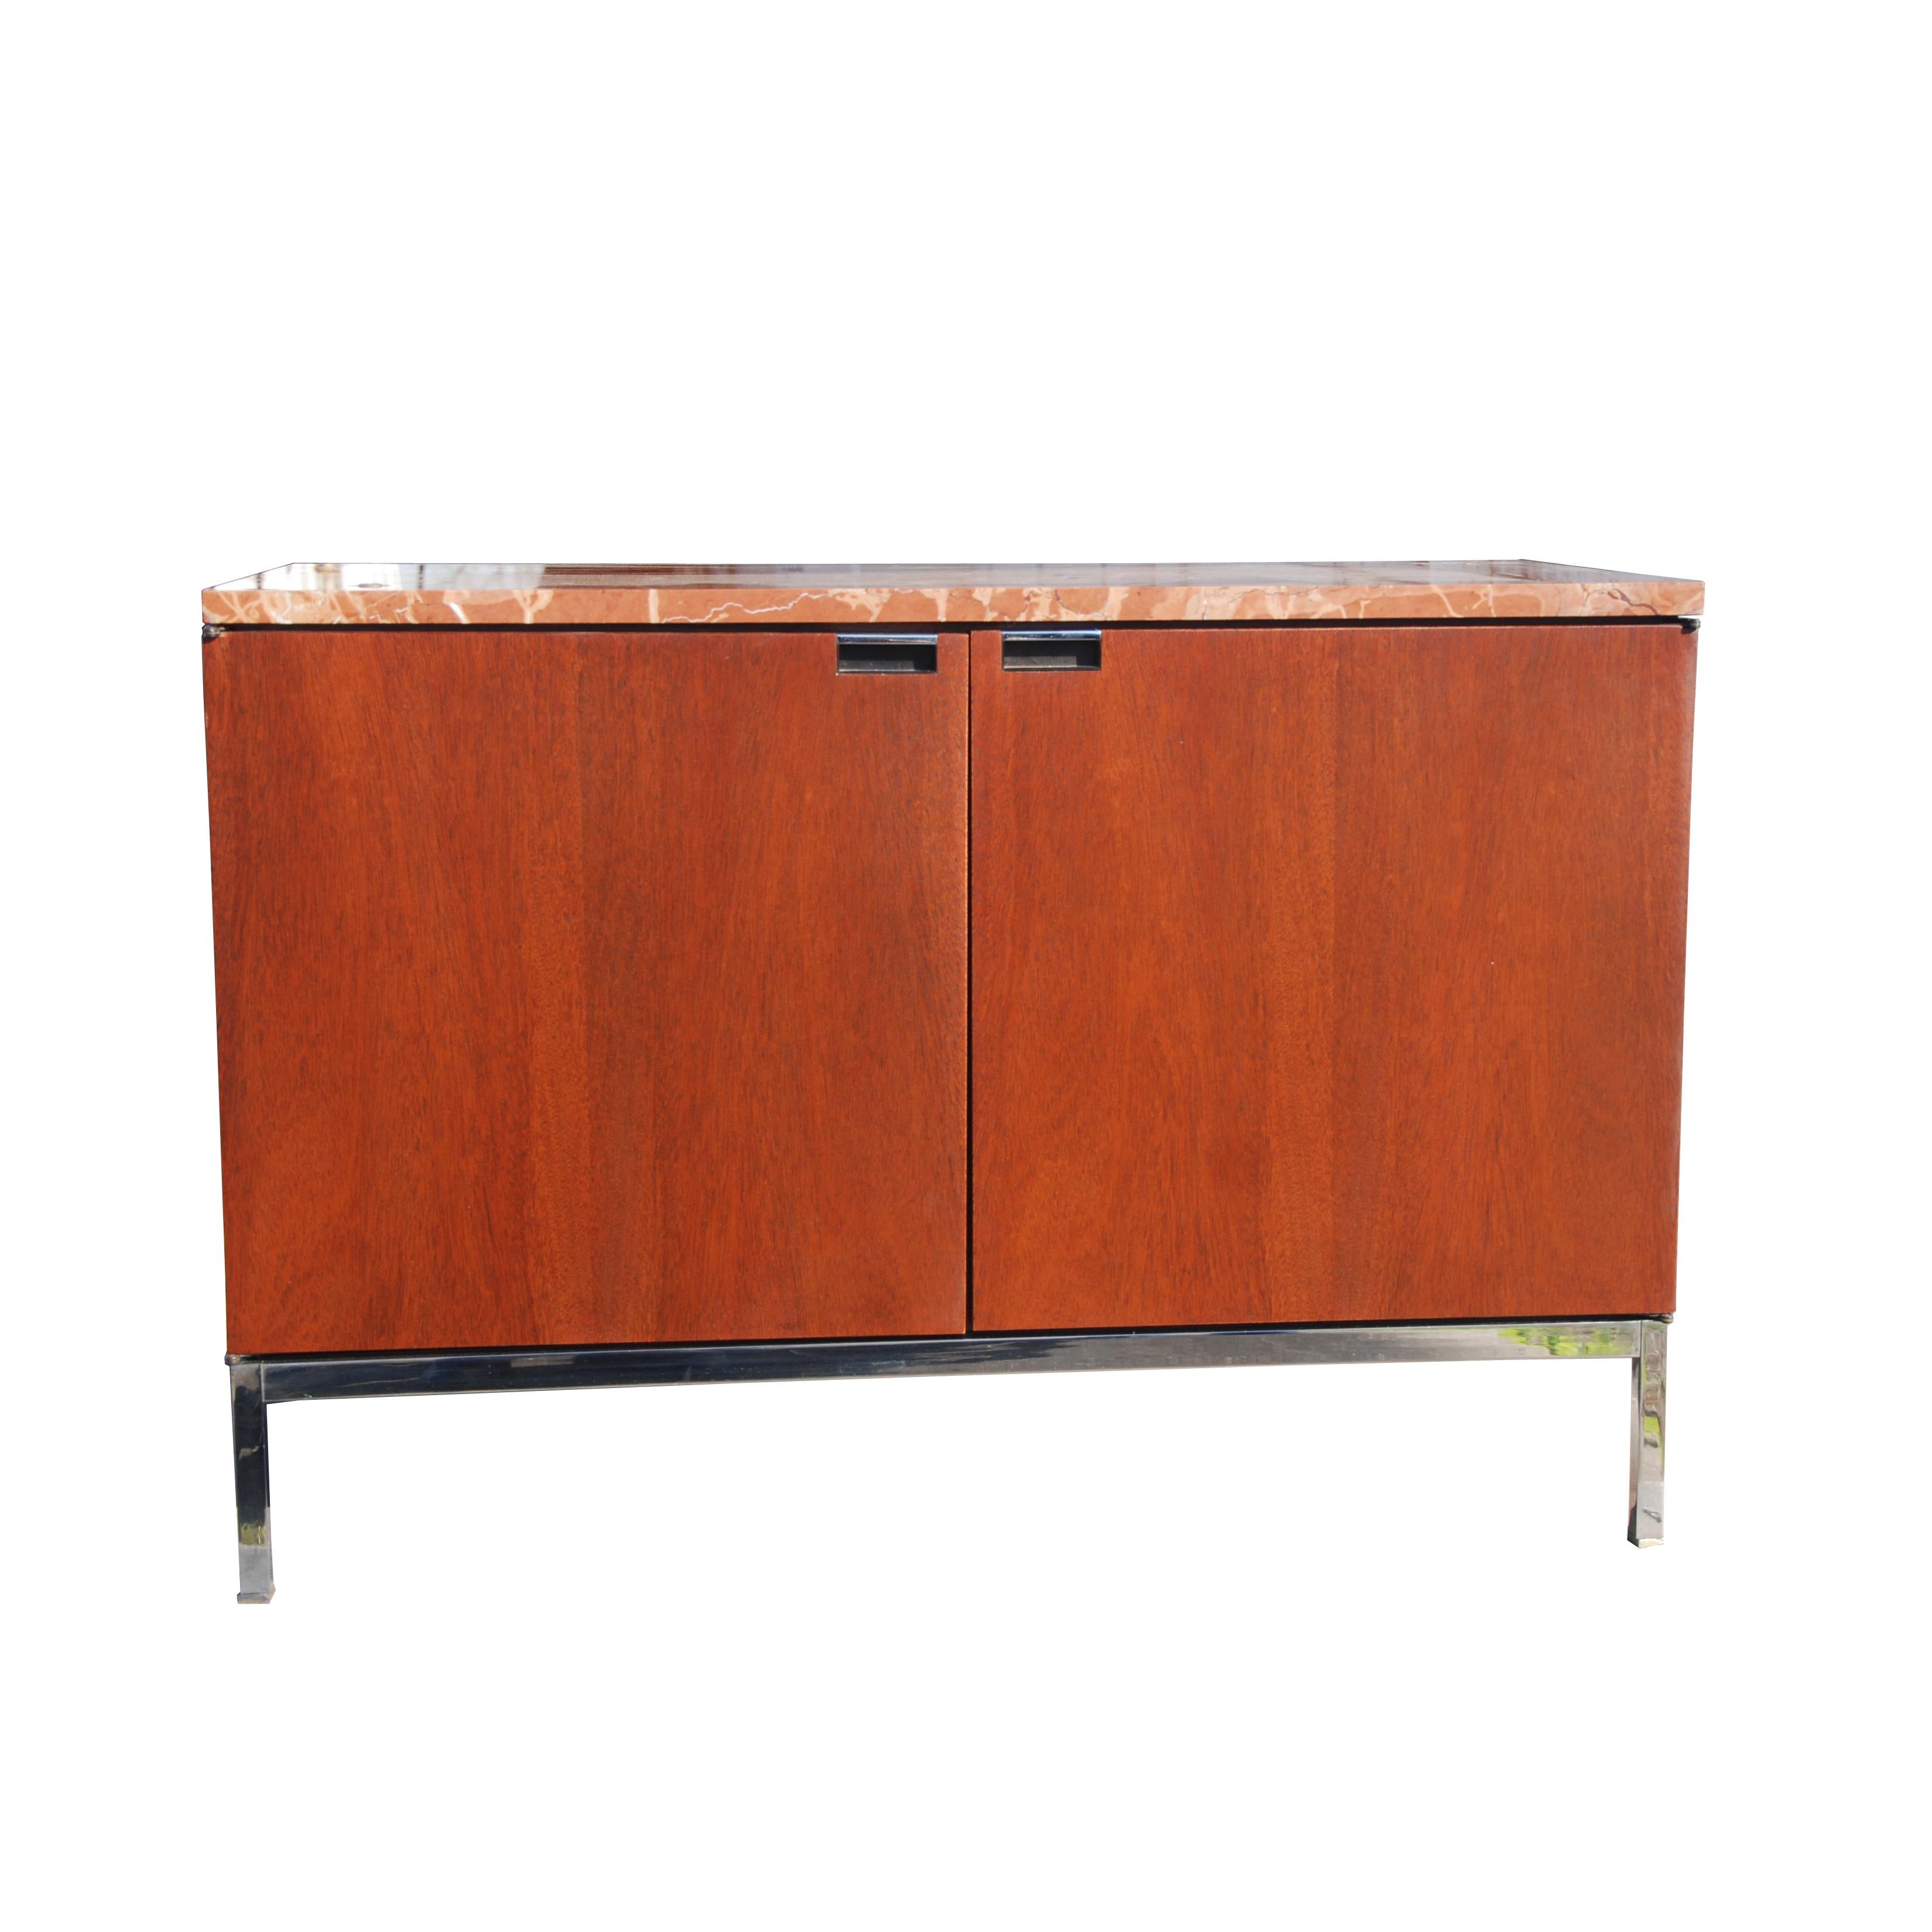 Mid-Century Modern Knoll credenza with Rojo marble top


Two hinged doors with magnetic catches

Two cabinets, each cabinet has 2 removable, adjustable shelf

Metal legs and trim



Measures: 37.5